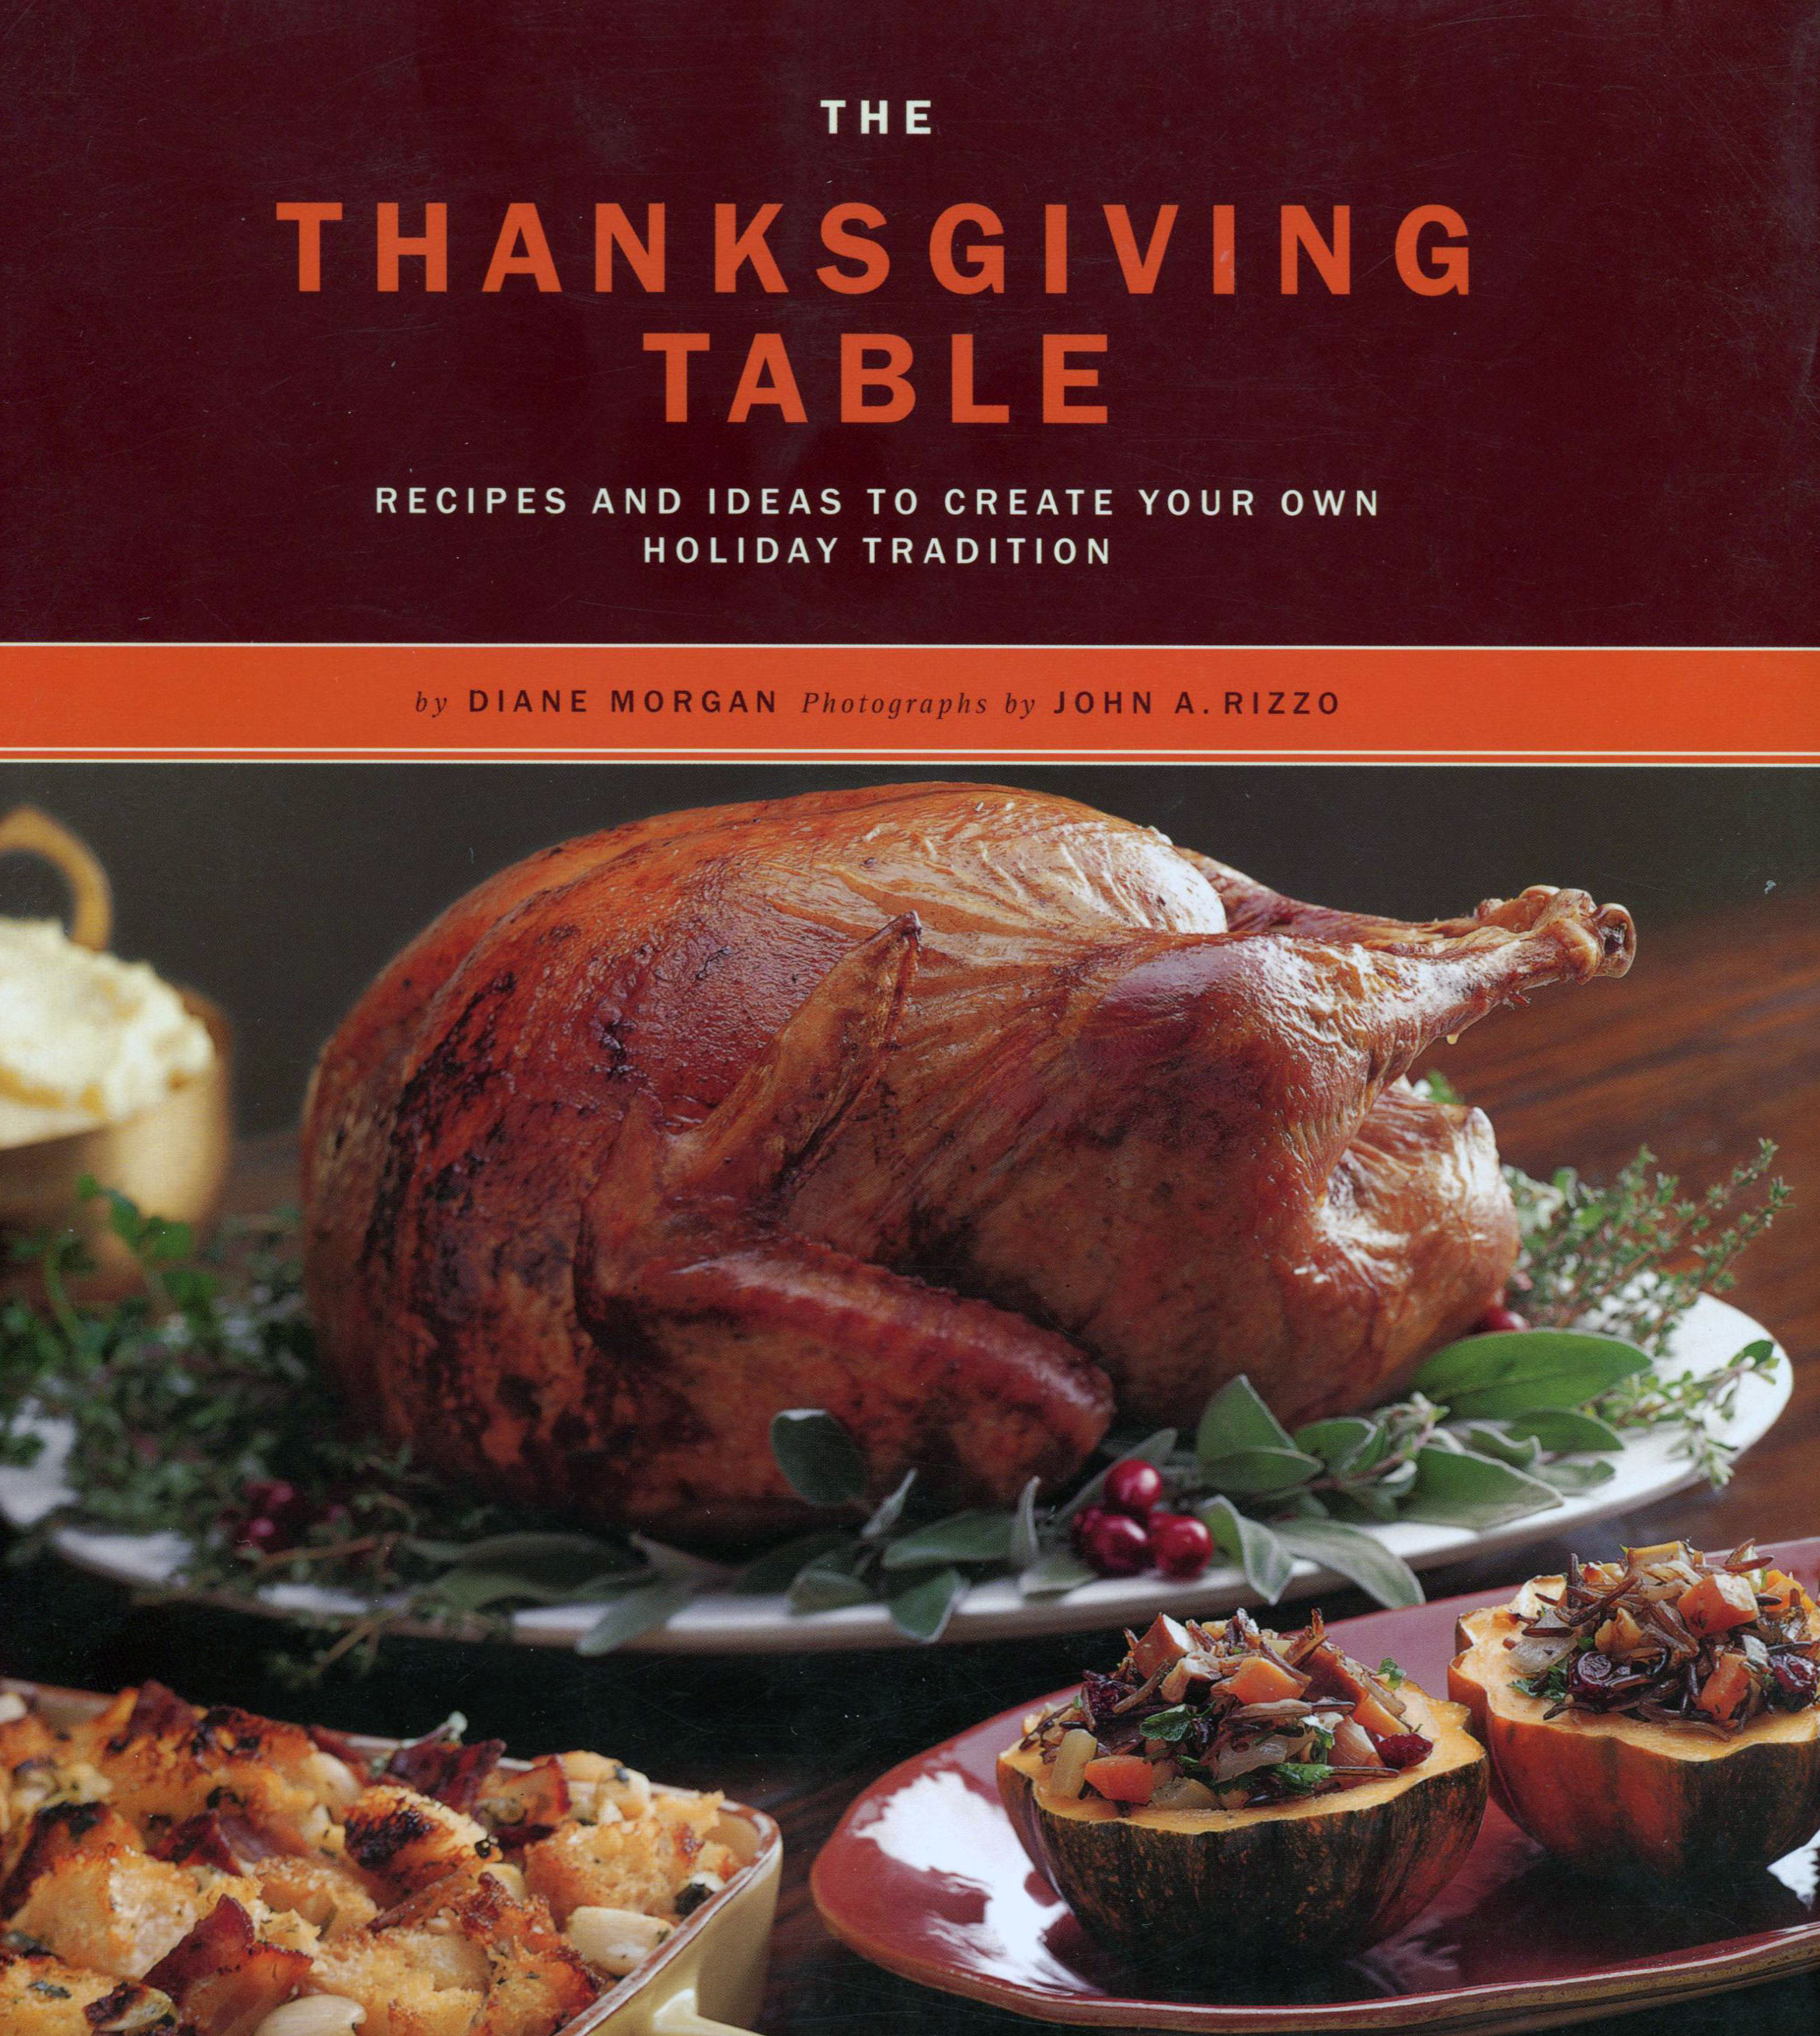 TBT Cookbook Review: The Thanksgiving Table by Diane Morgan